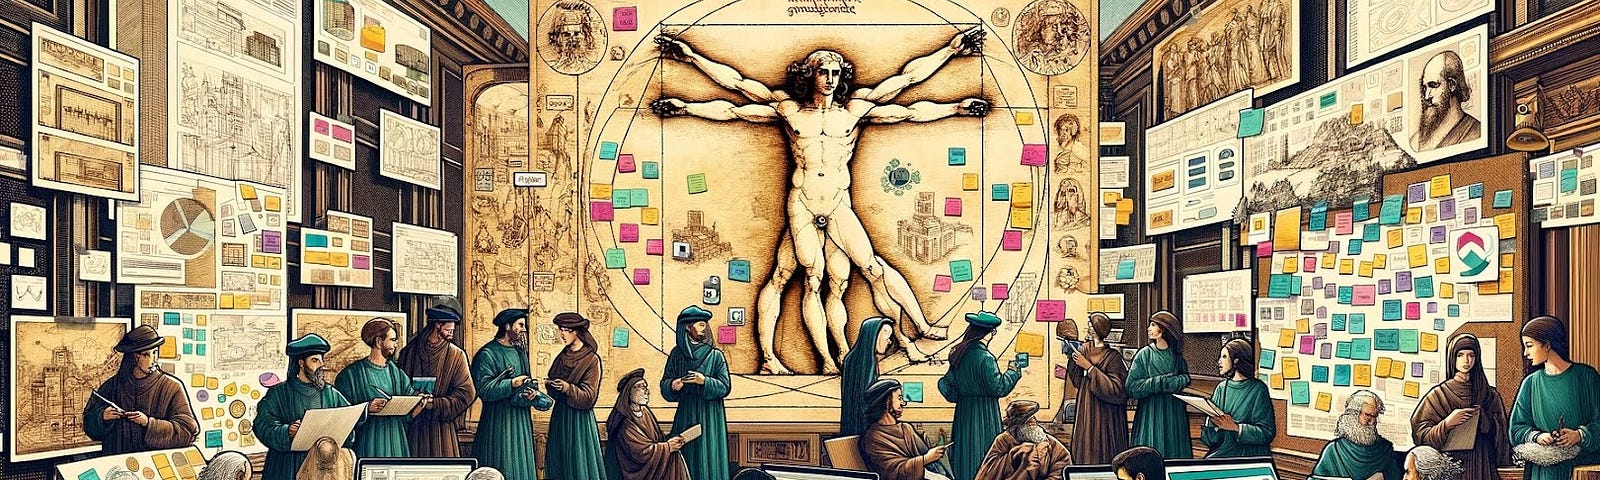 A dynamic scene blends Renaissance and modern elements, centered around the Vitruvian Man with individuals in mixed attire using both ancient tools and digital devices in a workshop setting.